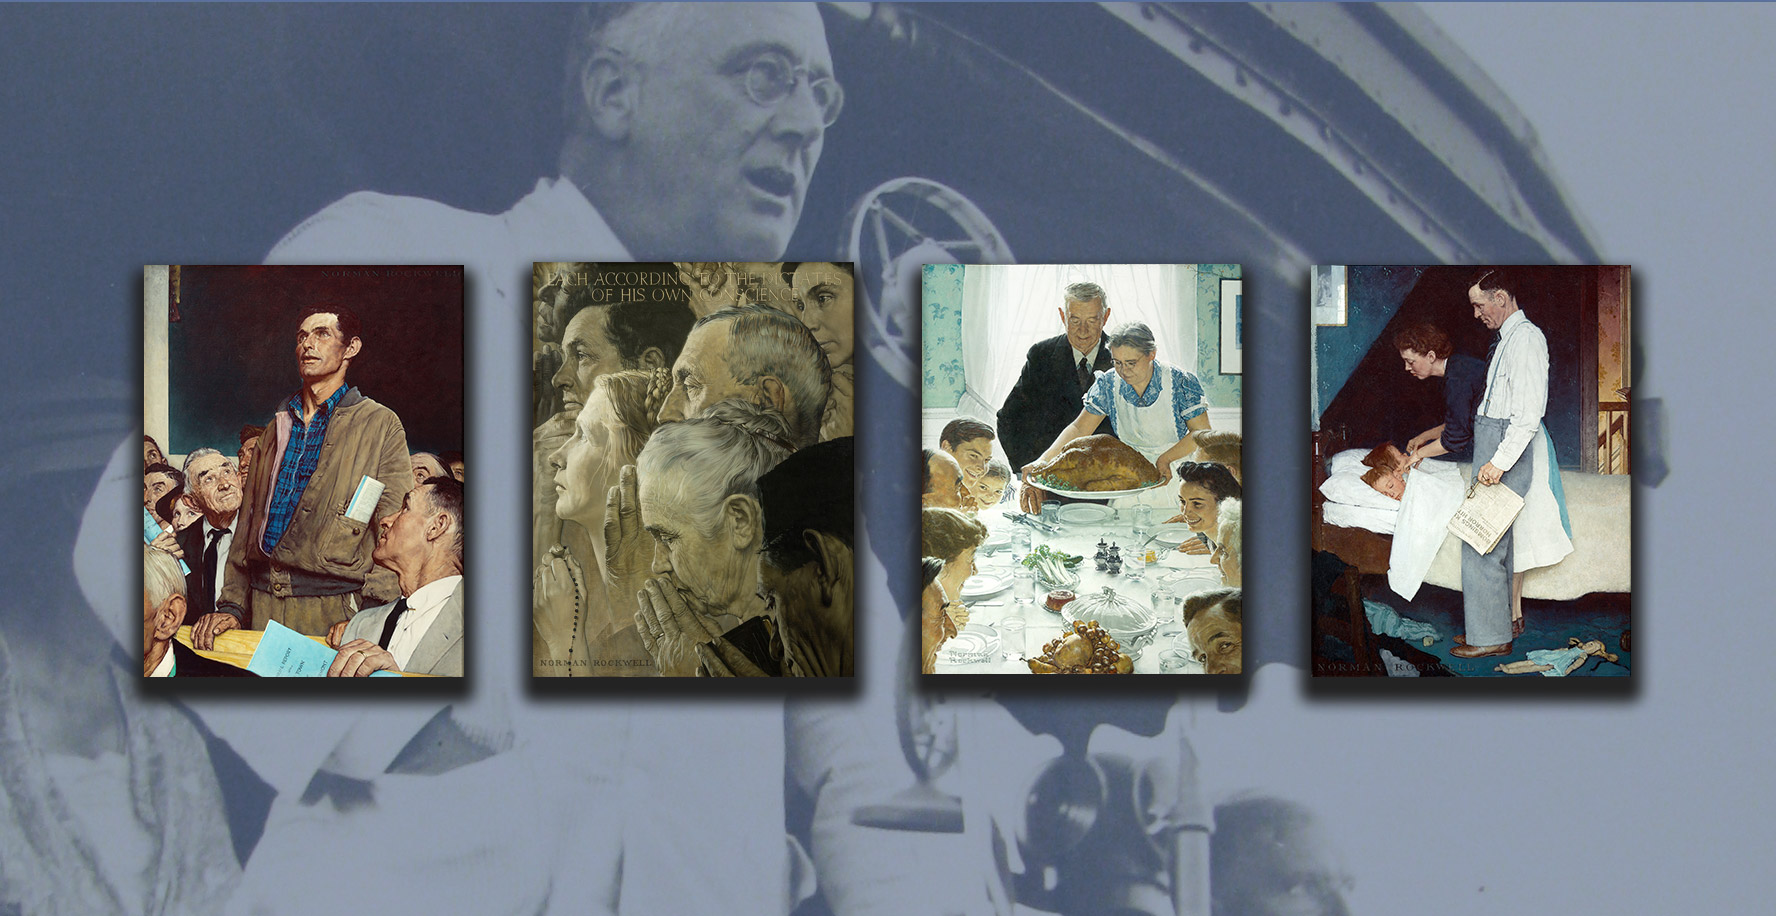 Rockwell, Roosevelt & the Four Freedoms - Timeline